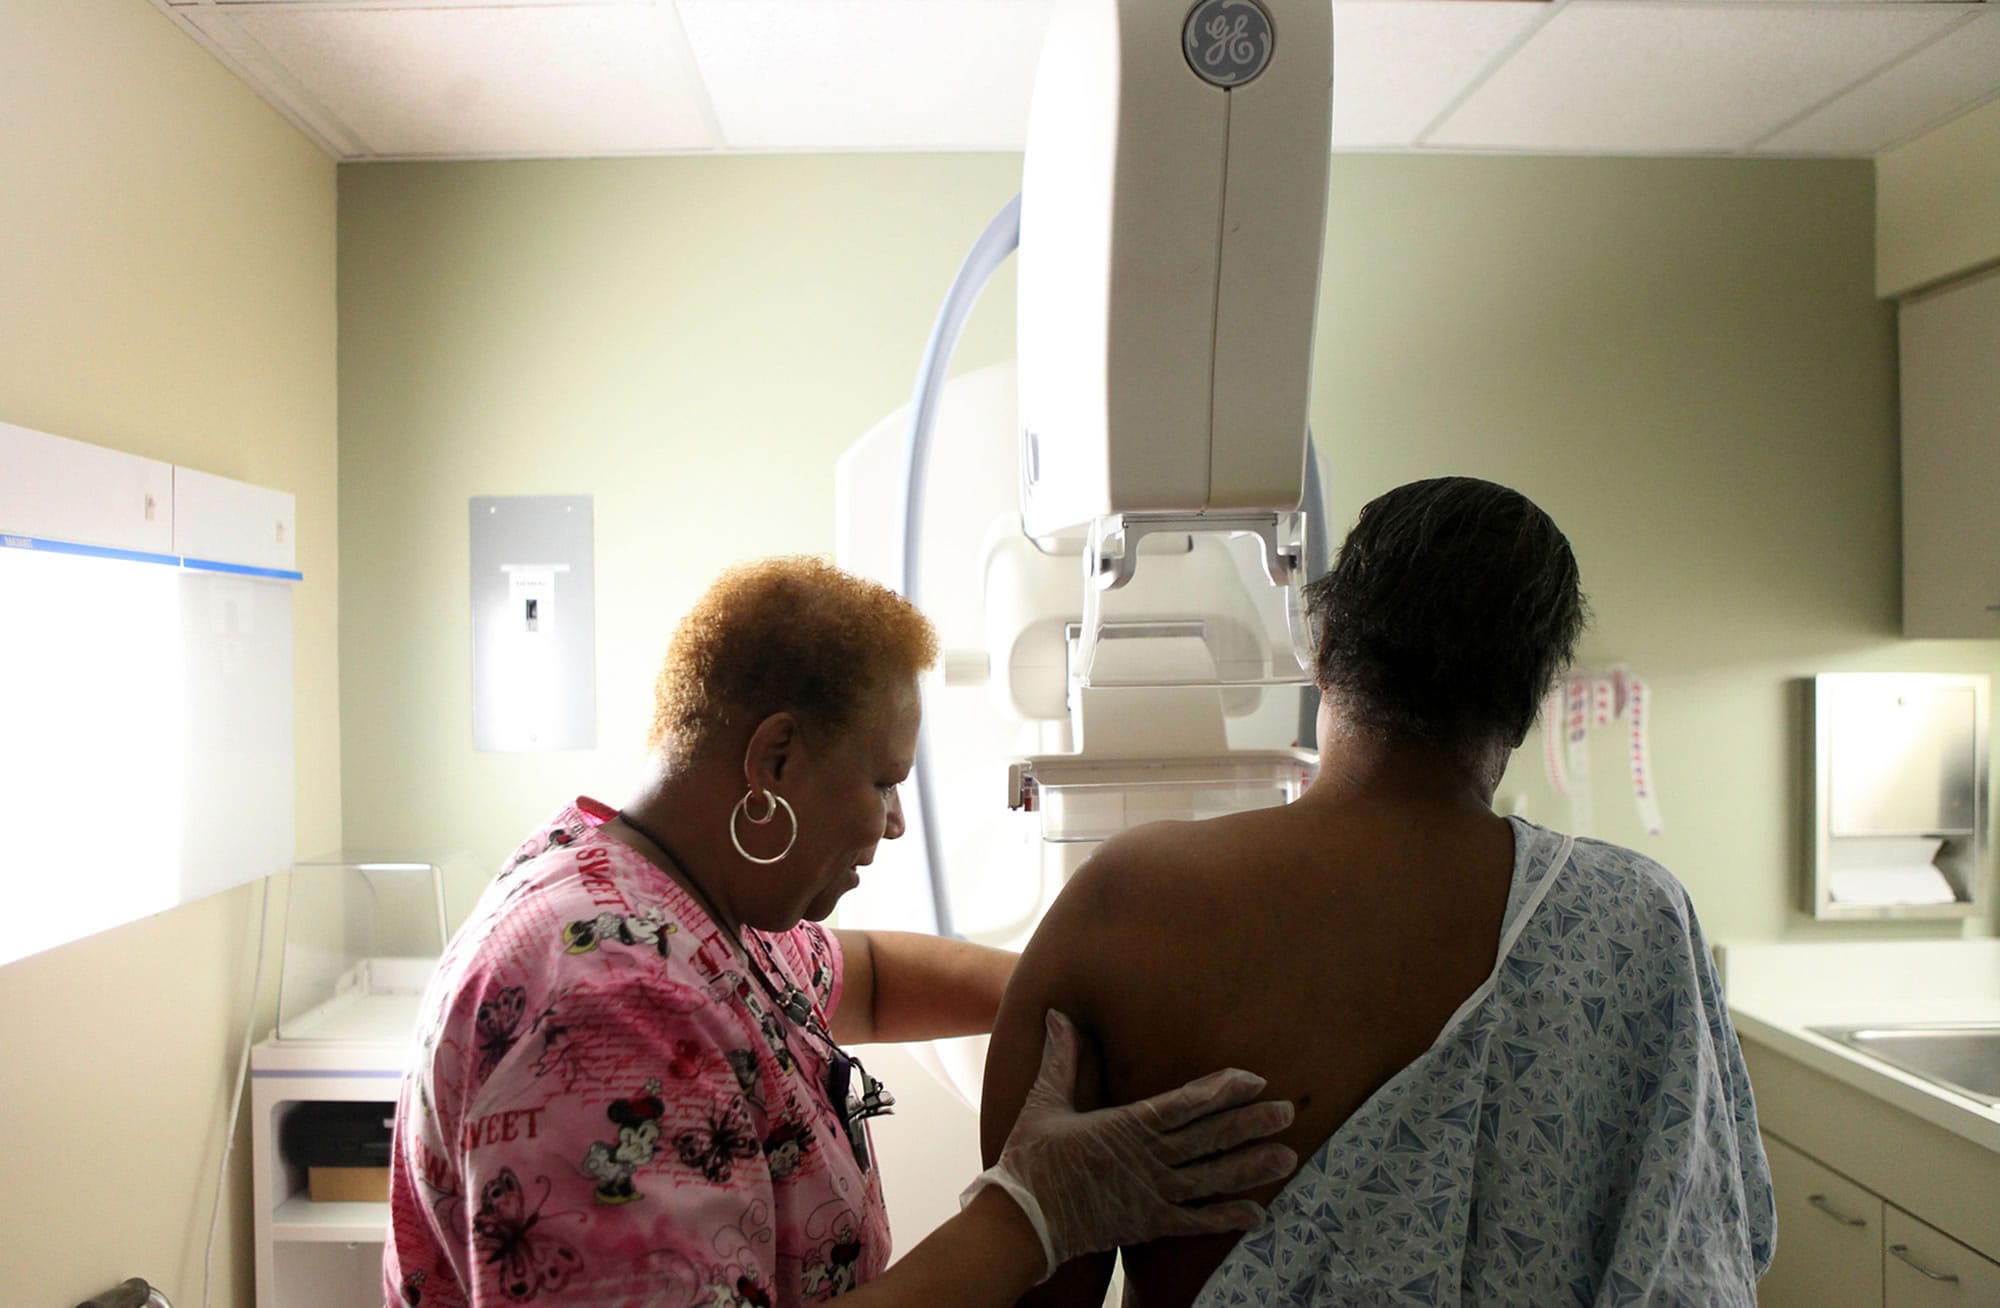 The American Cancer Society continues to advise women to get screening mammograms annually beginning at age 40 and for as long as they are healthy.